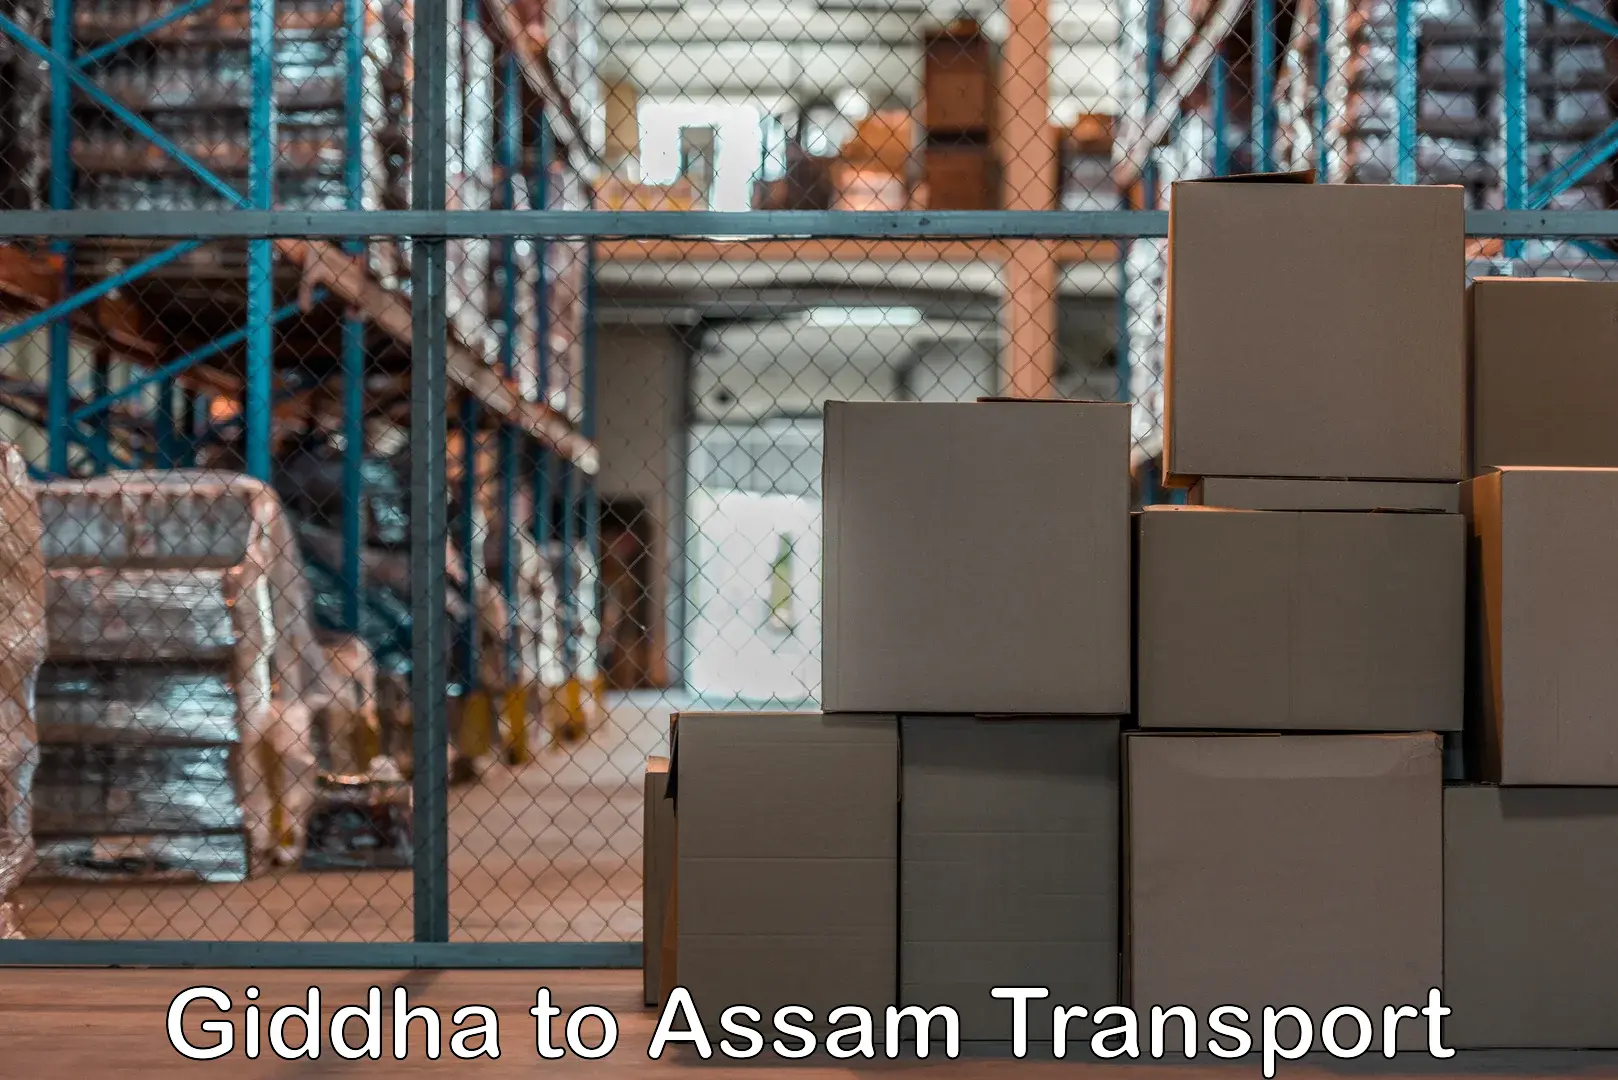 Container transport service Giddha to Assam